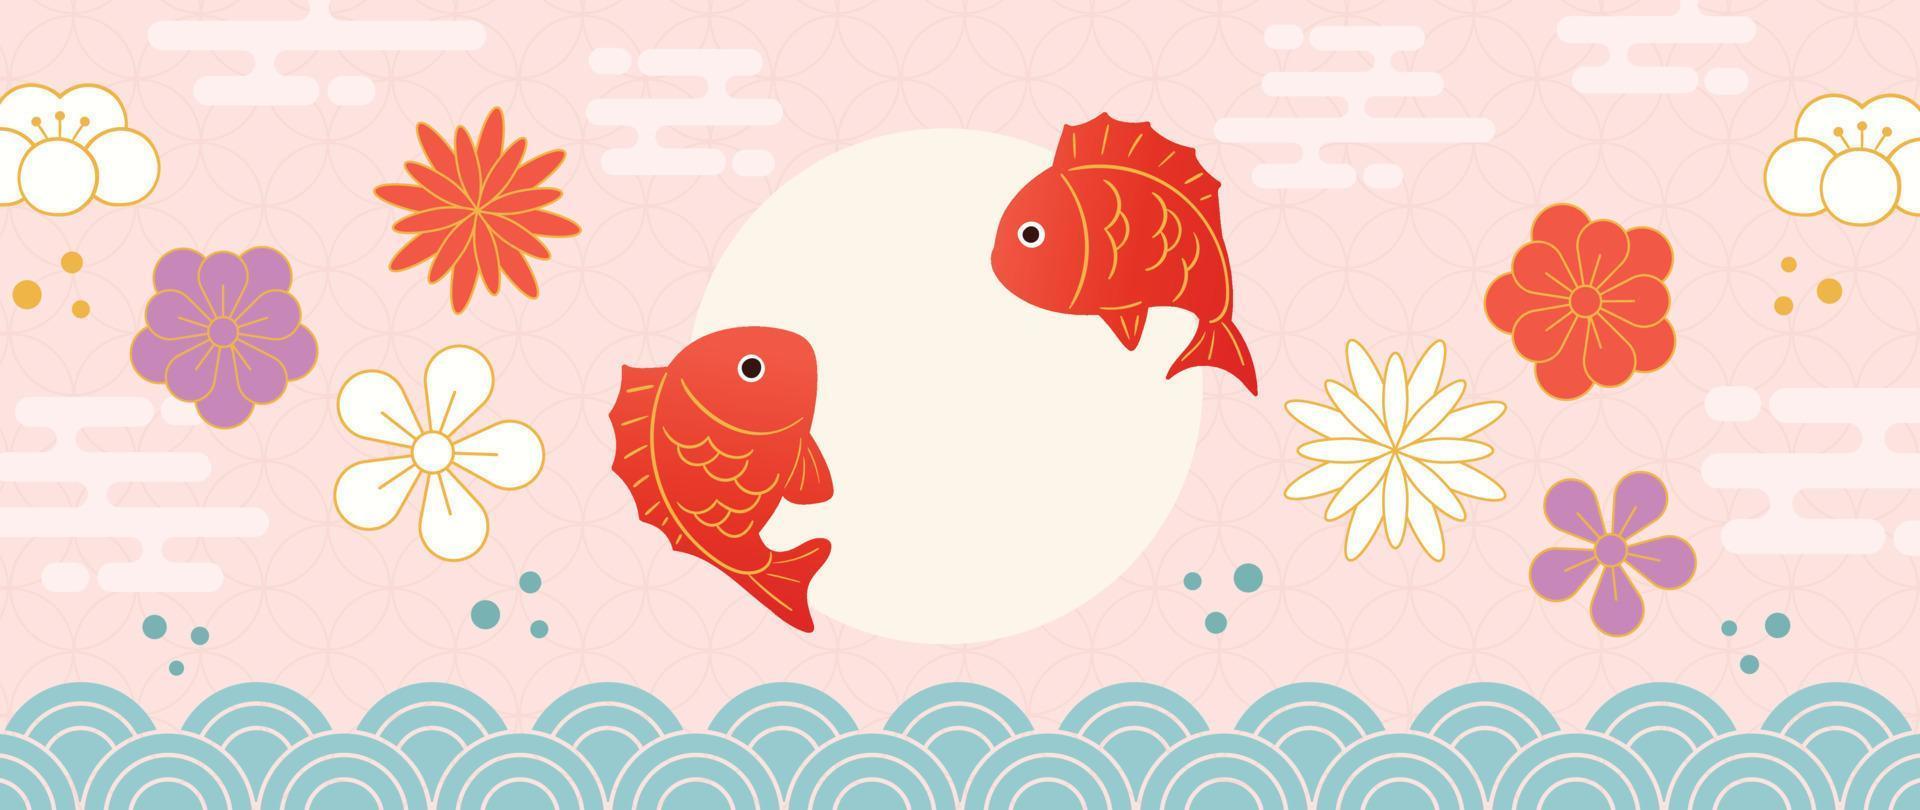 Japanese background vector illustration. Happy new year decoration template in pastel vibrant color japanese pattern style with goldfish, flower and wave. Design for card, wallpaper, poster, banner.